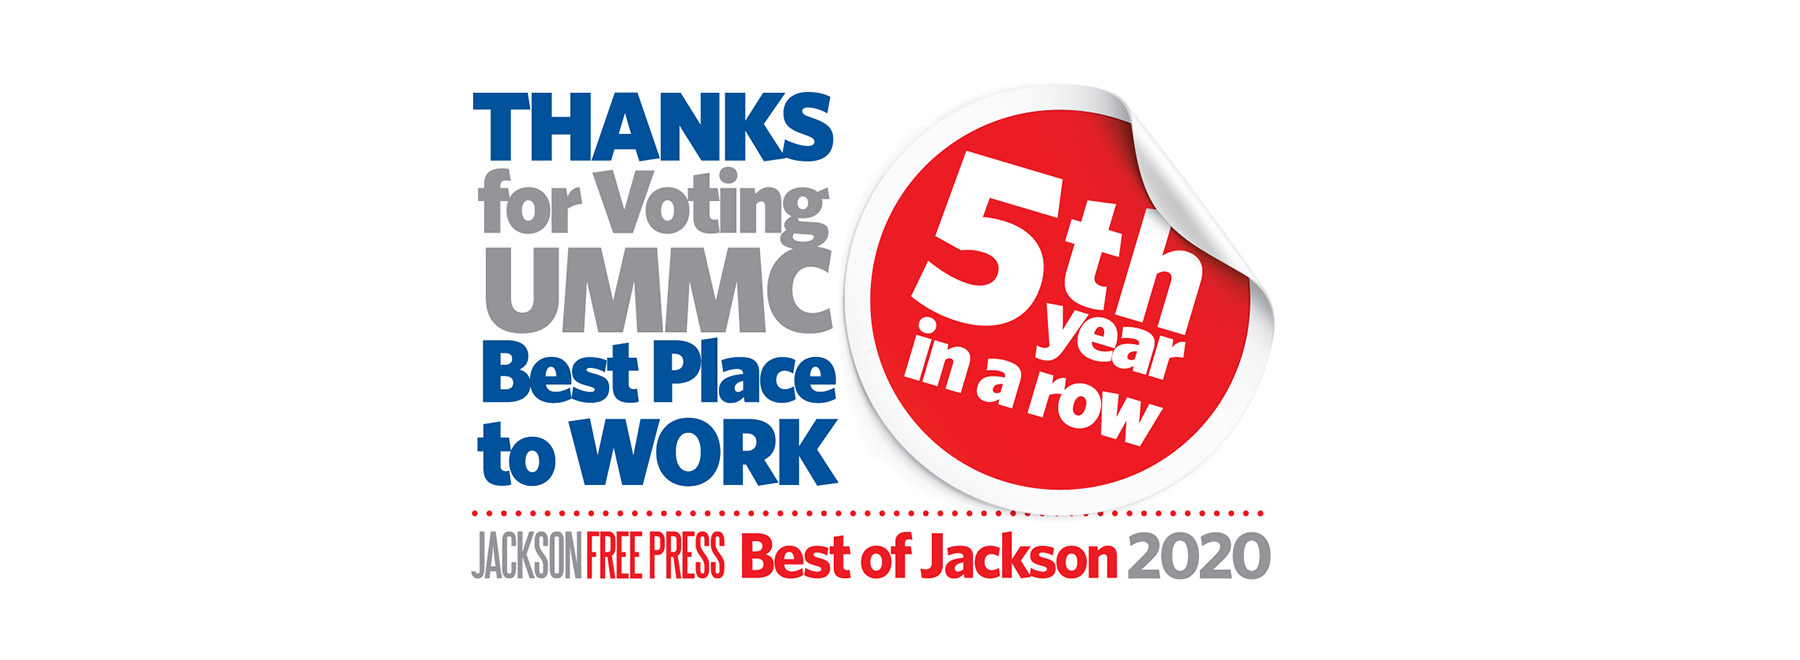 Thanks for voting UMMC Best Place to Work - 5th Year in a Row. Jackson Free Press. Best of Jackson 2020.